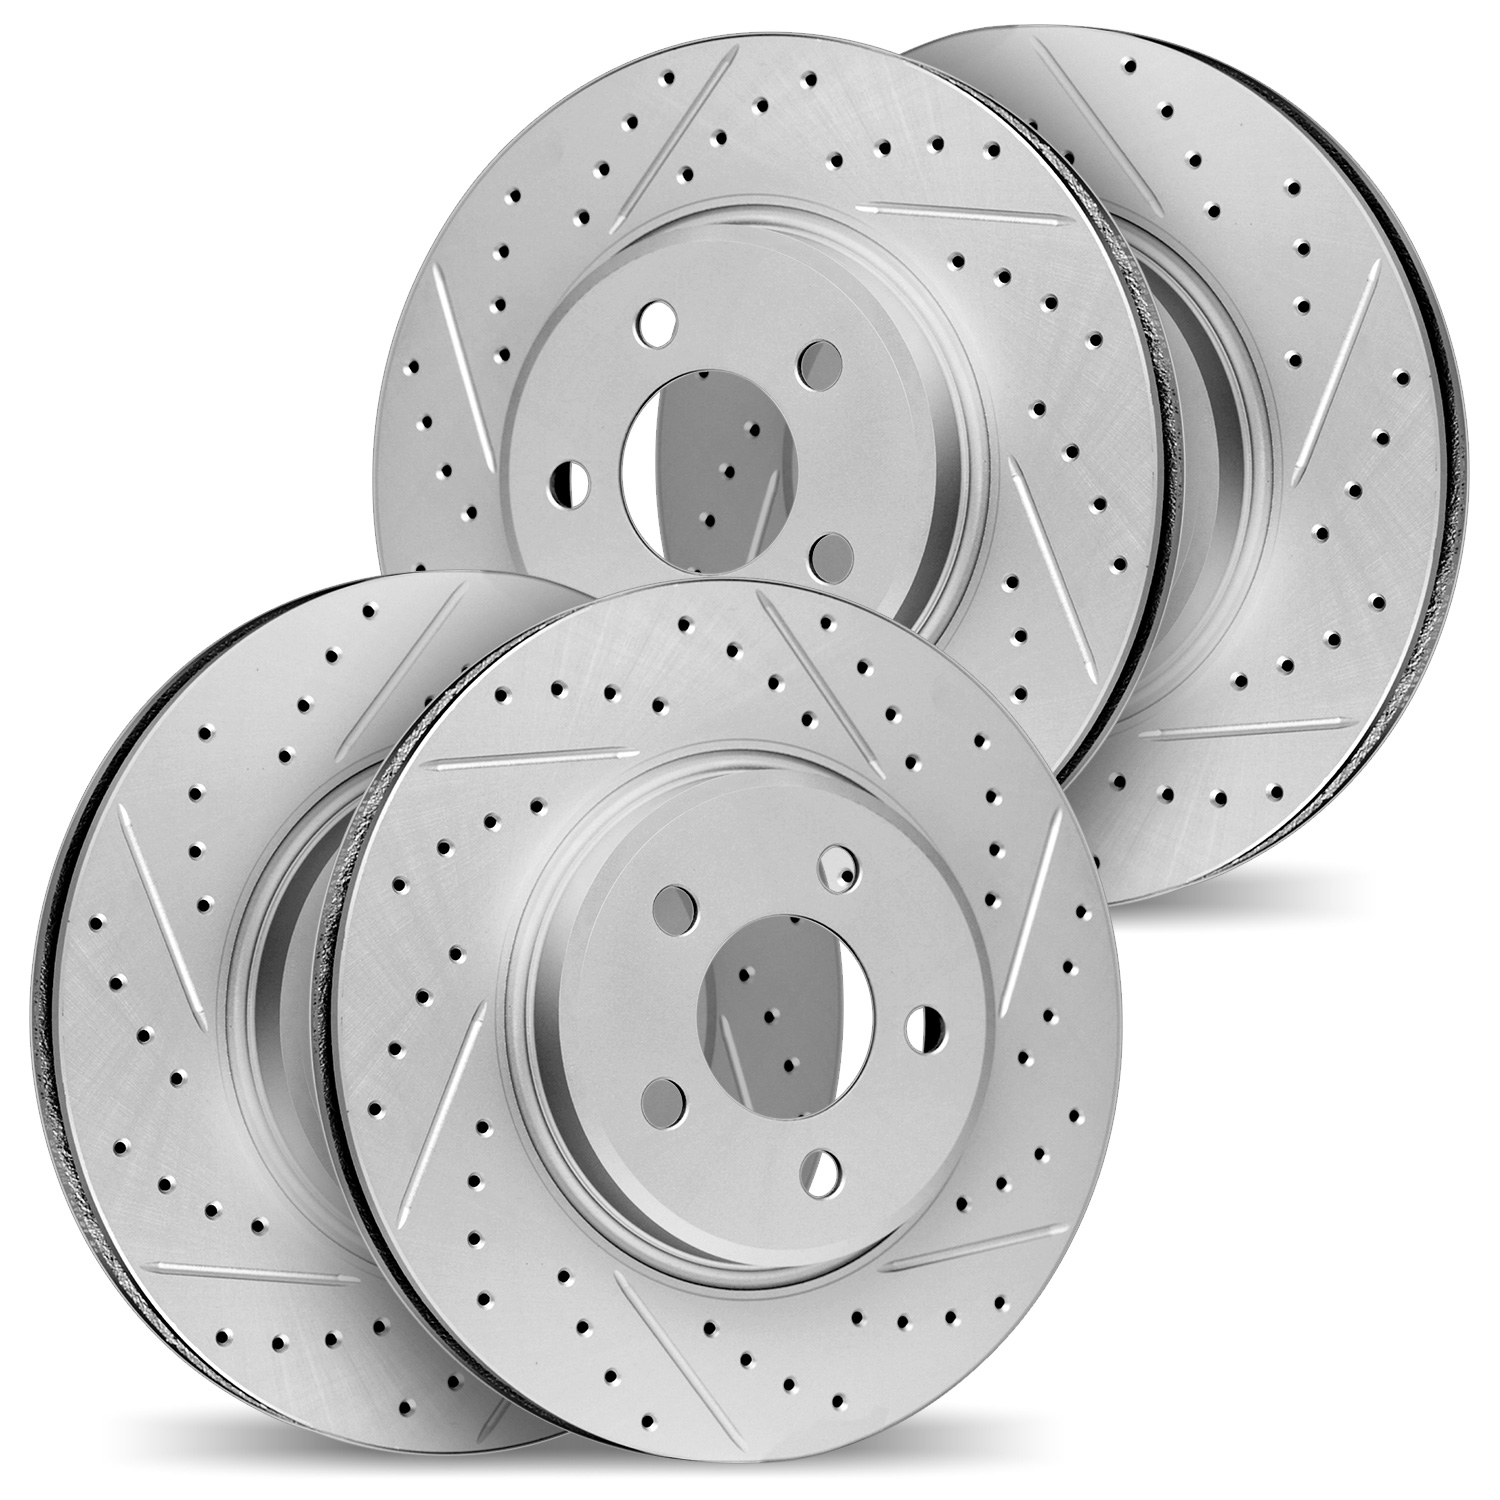 2004-11017 Geoperformance Drilled/Slotted Brake Rotors, 2006-2012 Land Rover, Position: Front and Rear